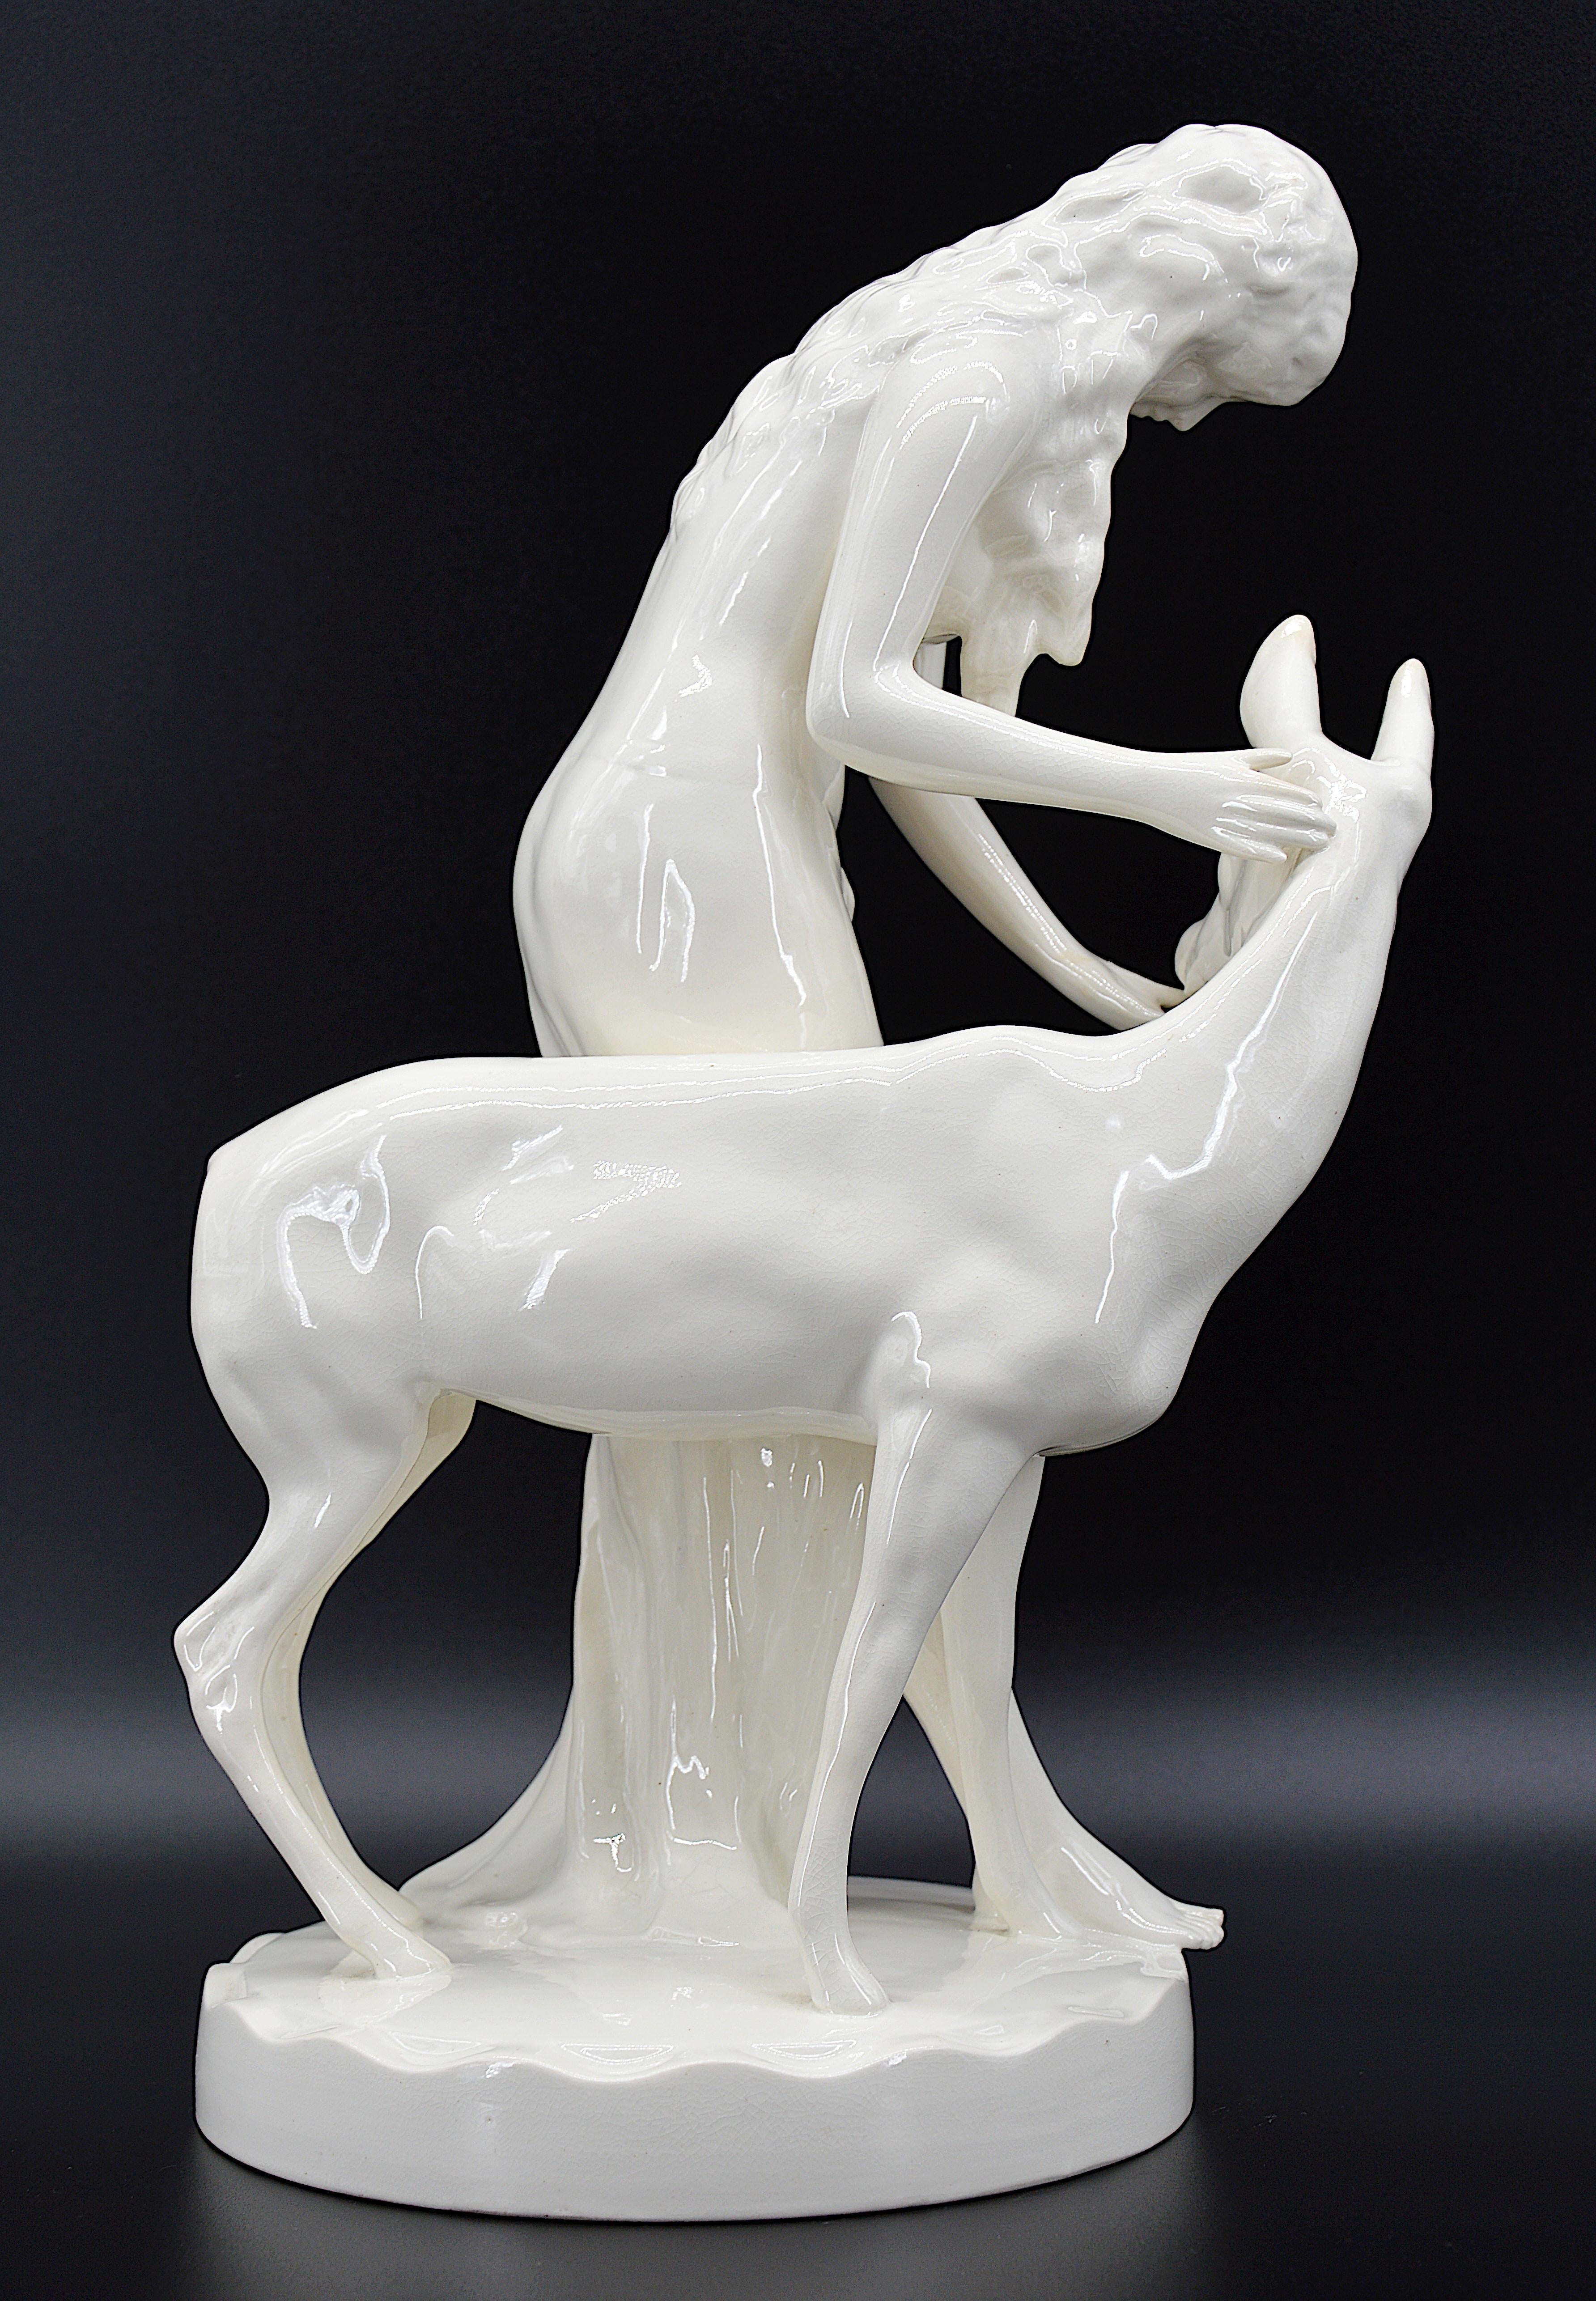 Early 20th Century Royal Dux Crackle Glaze Ceramic Sculpture, the Young Lady and the Fawn 1918-1925 For Sale